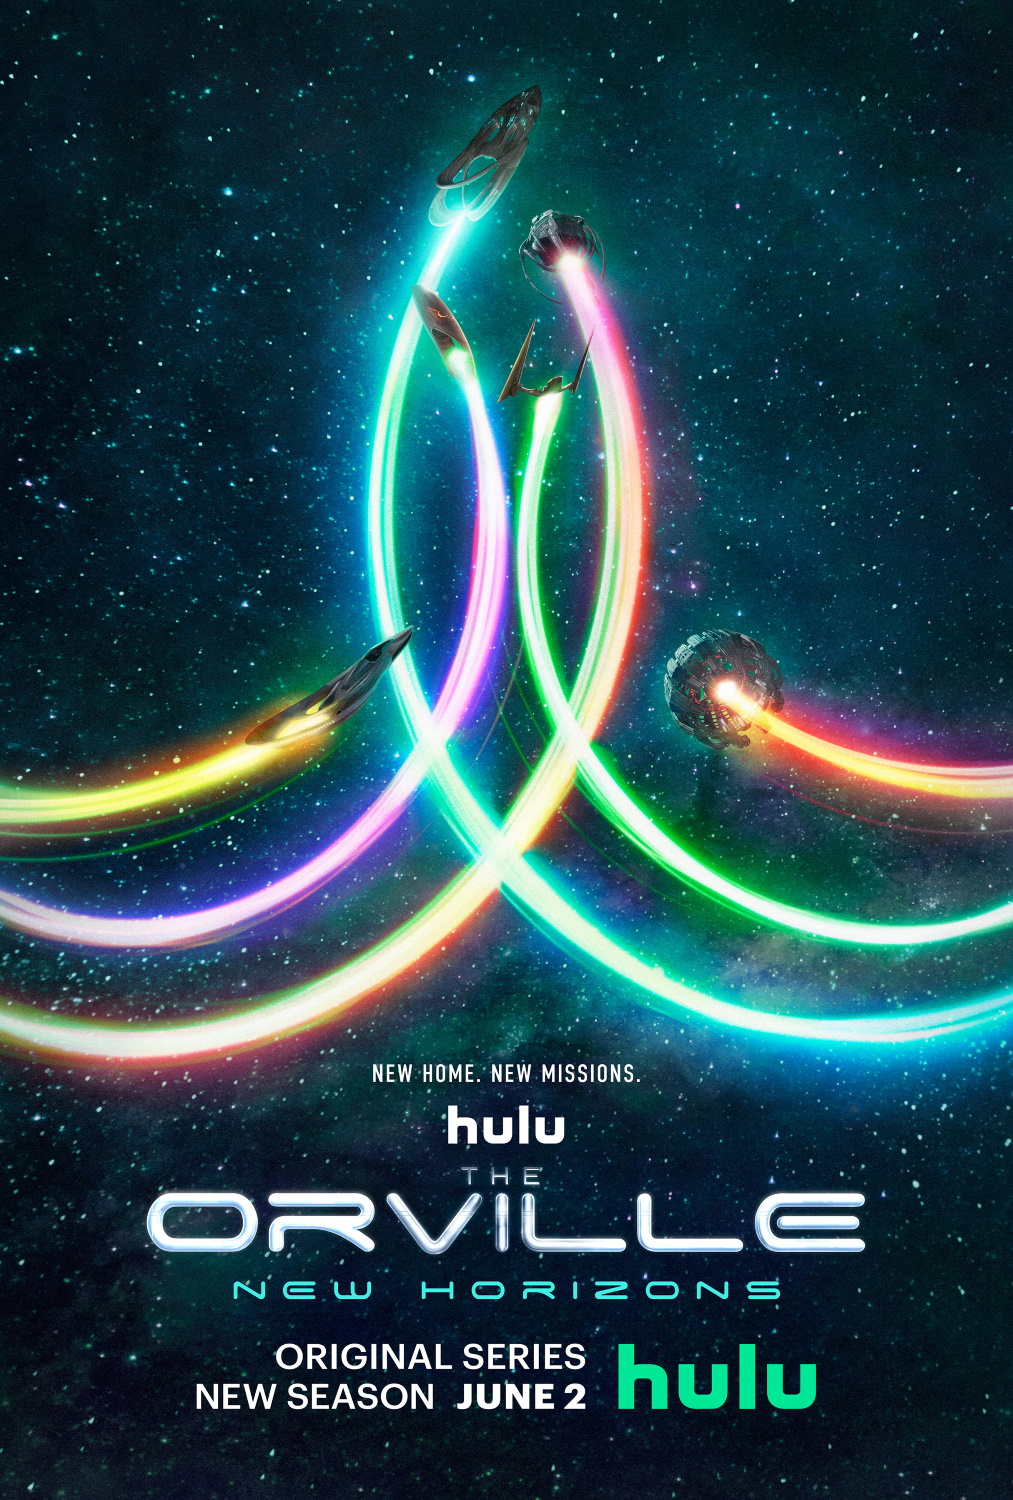 The Orvile New Horizons poster